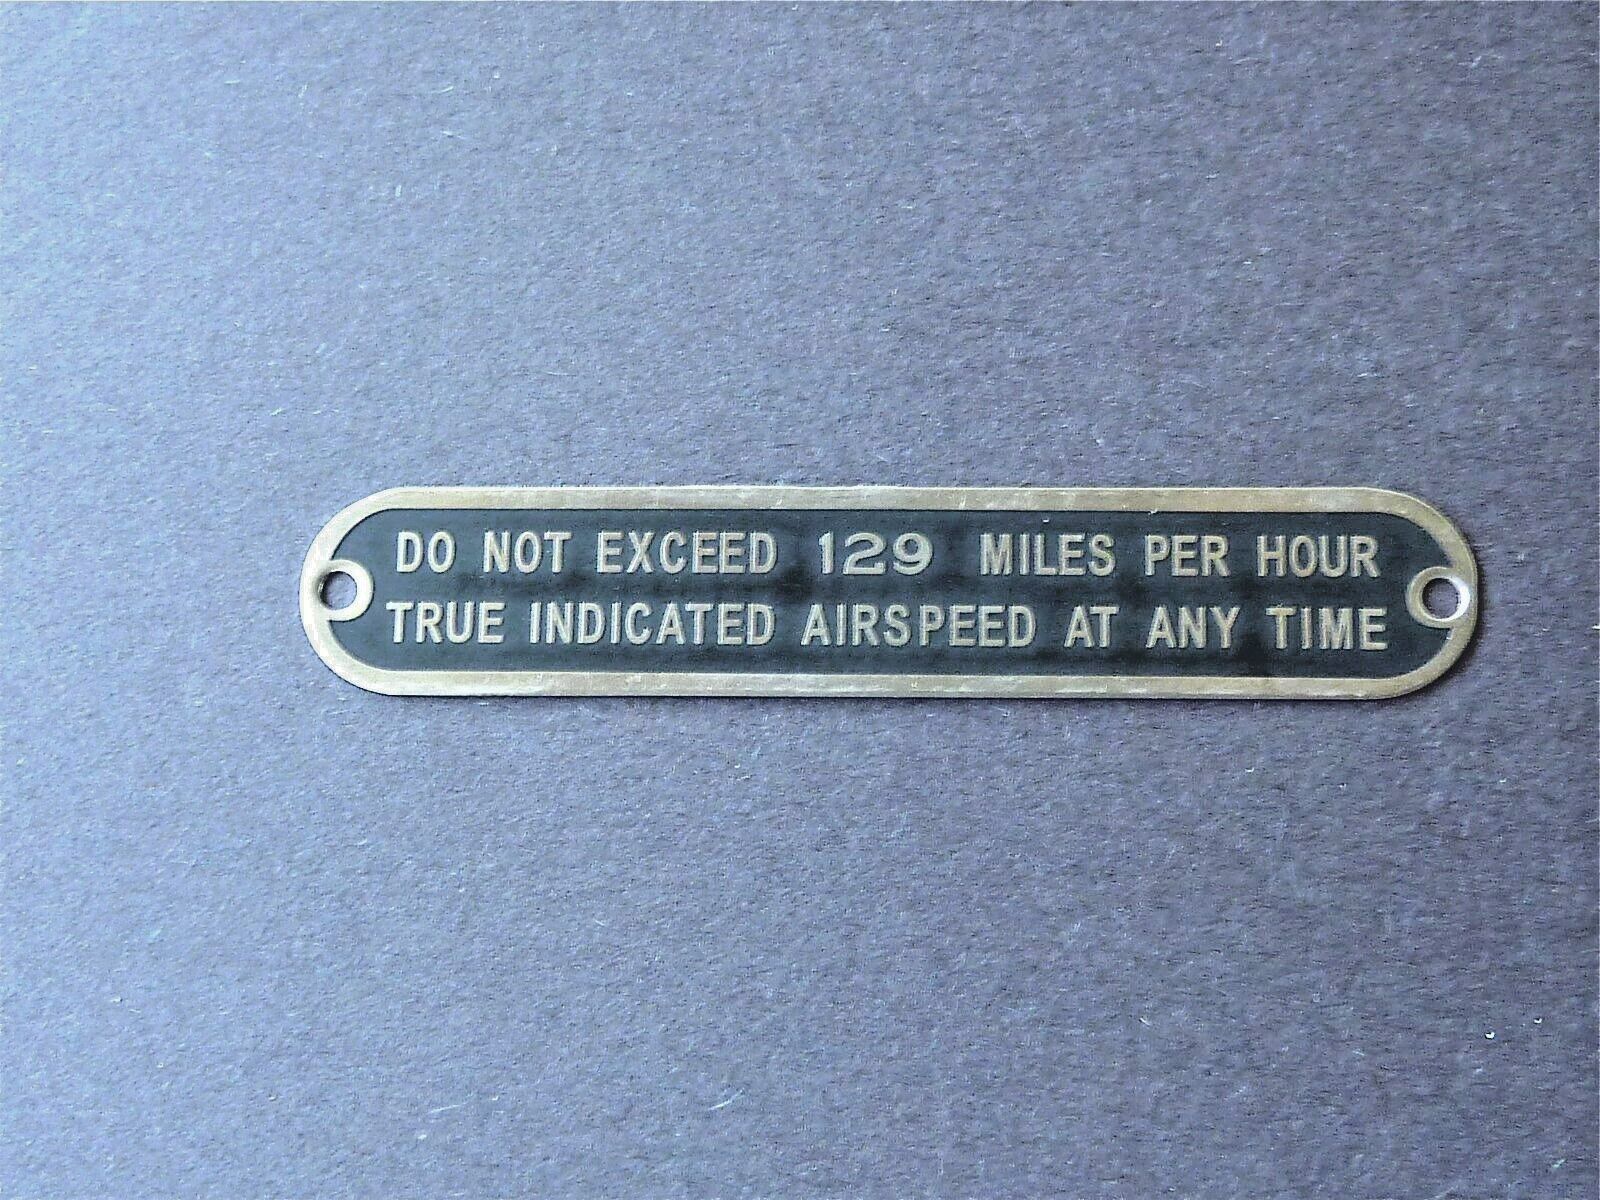 Aeronca Style 7AC Champ Max Airspeed Placard, DO NOT EXCEED 129 